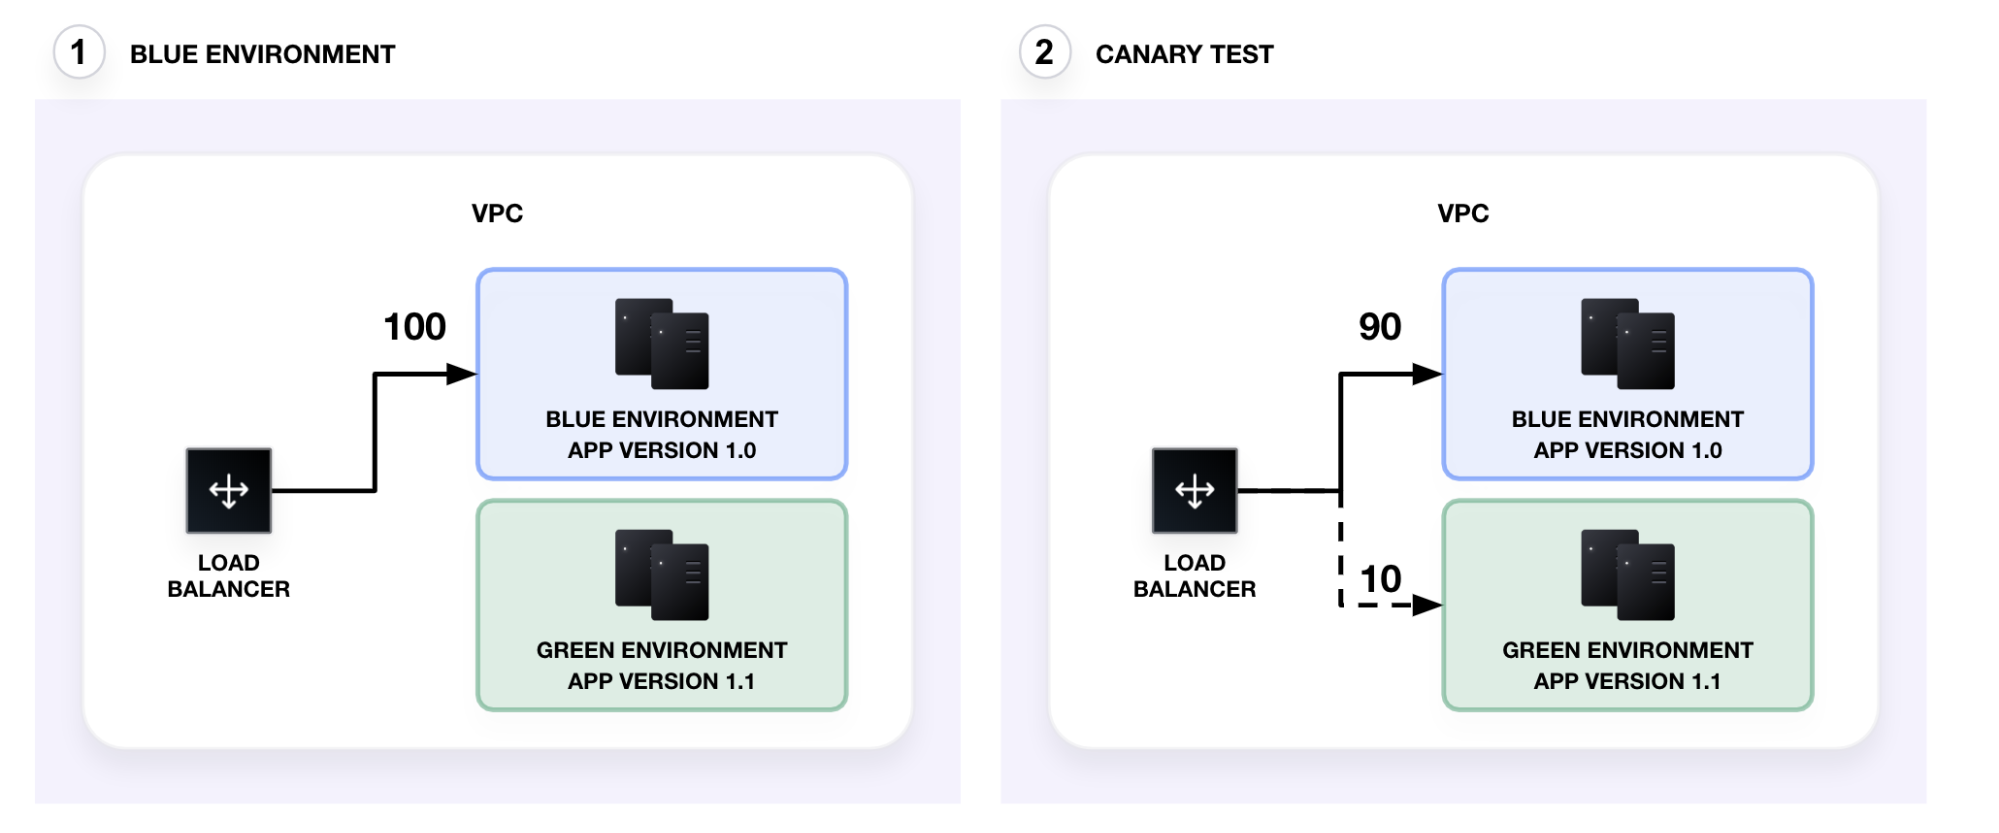 Canary test/deployment. All traffic is directed to the blue environment initially. When you perform a canary test, 10% of the traffic is directed to the green environment.